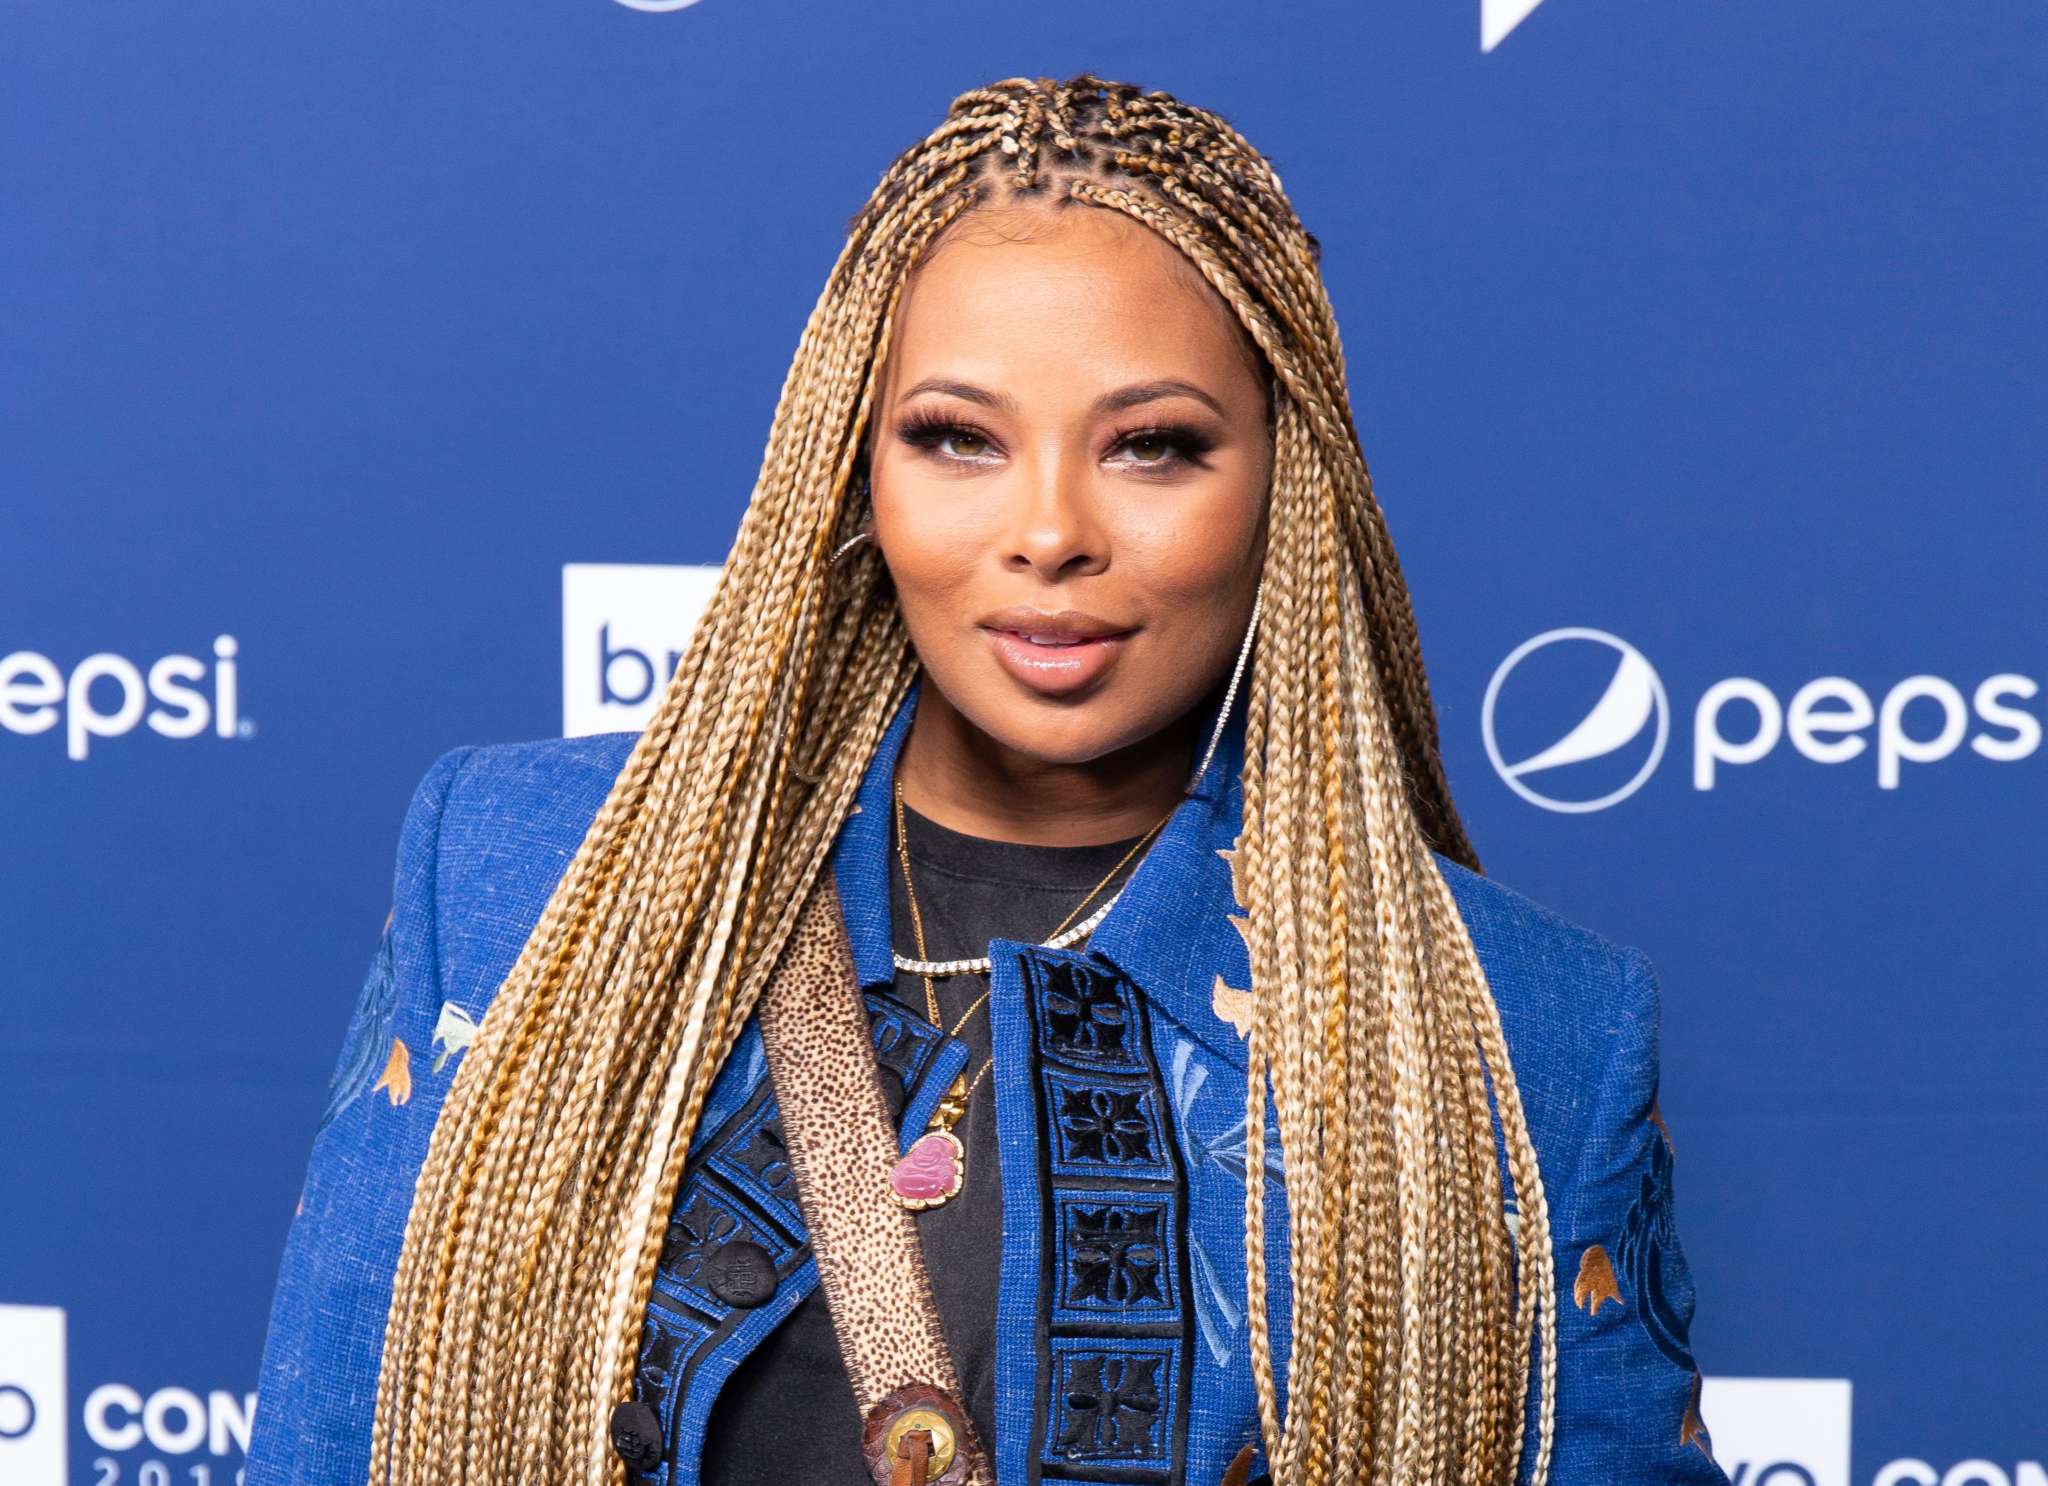 Eva Marcille's Recent Video Puts Her Fans In A Special Mood